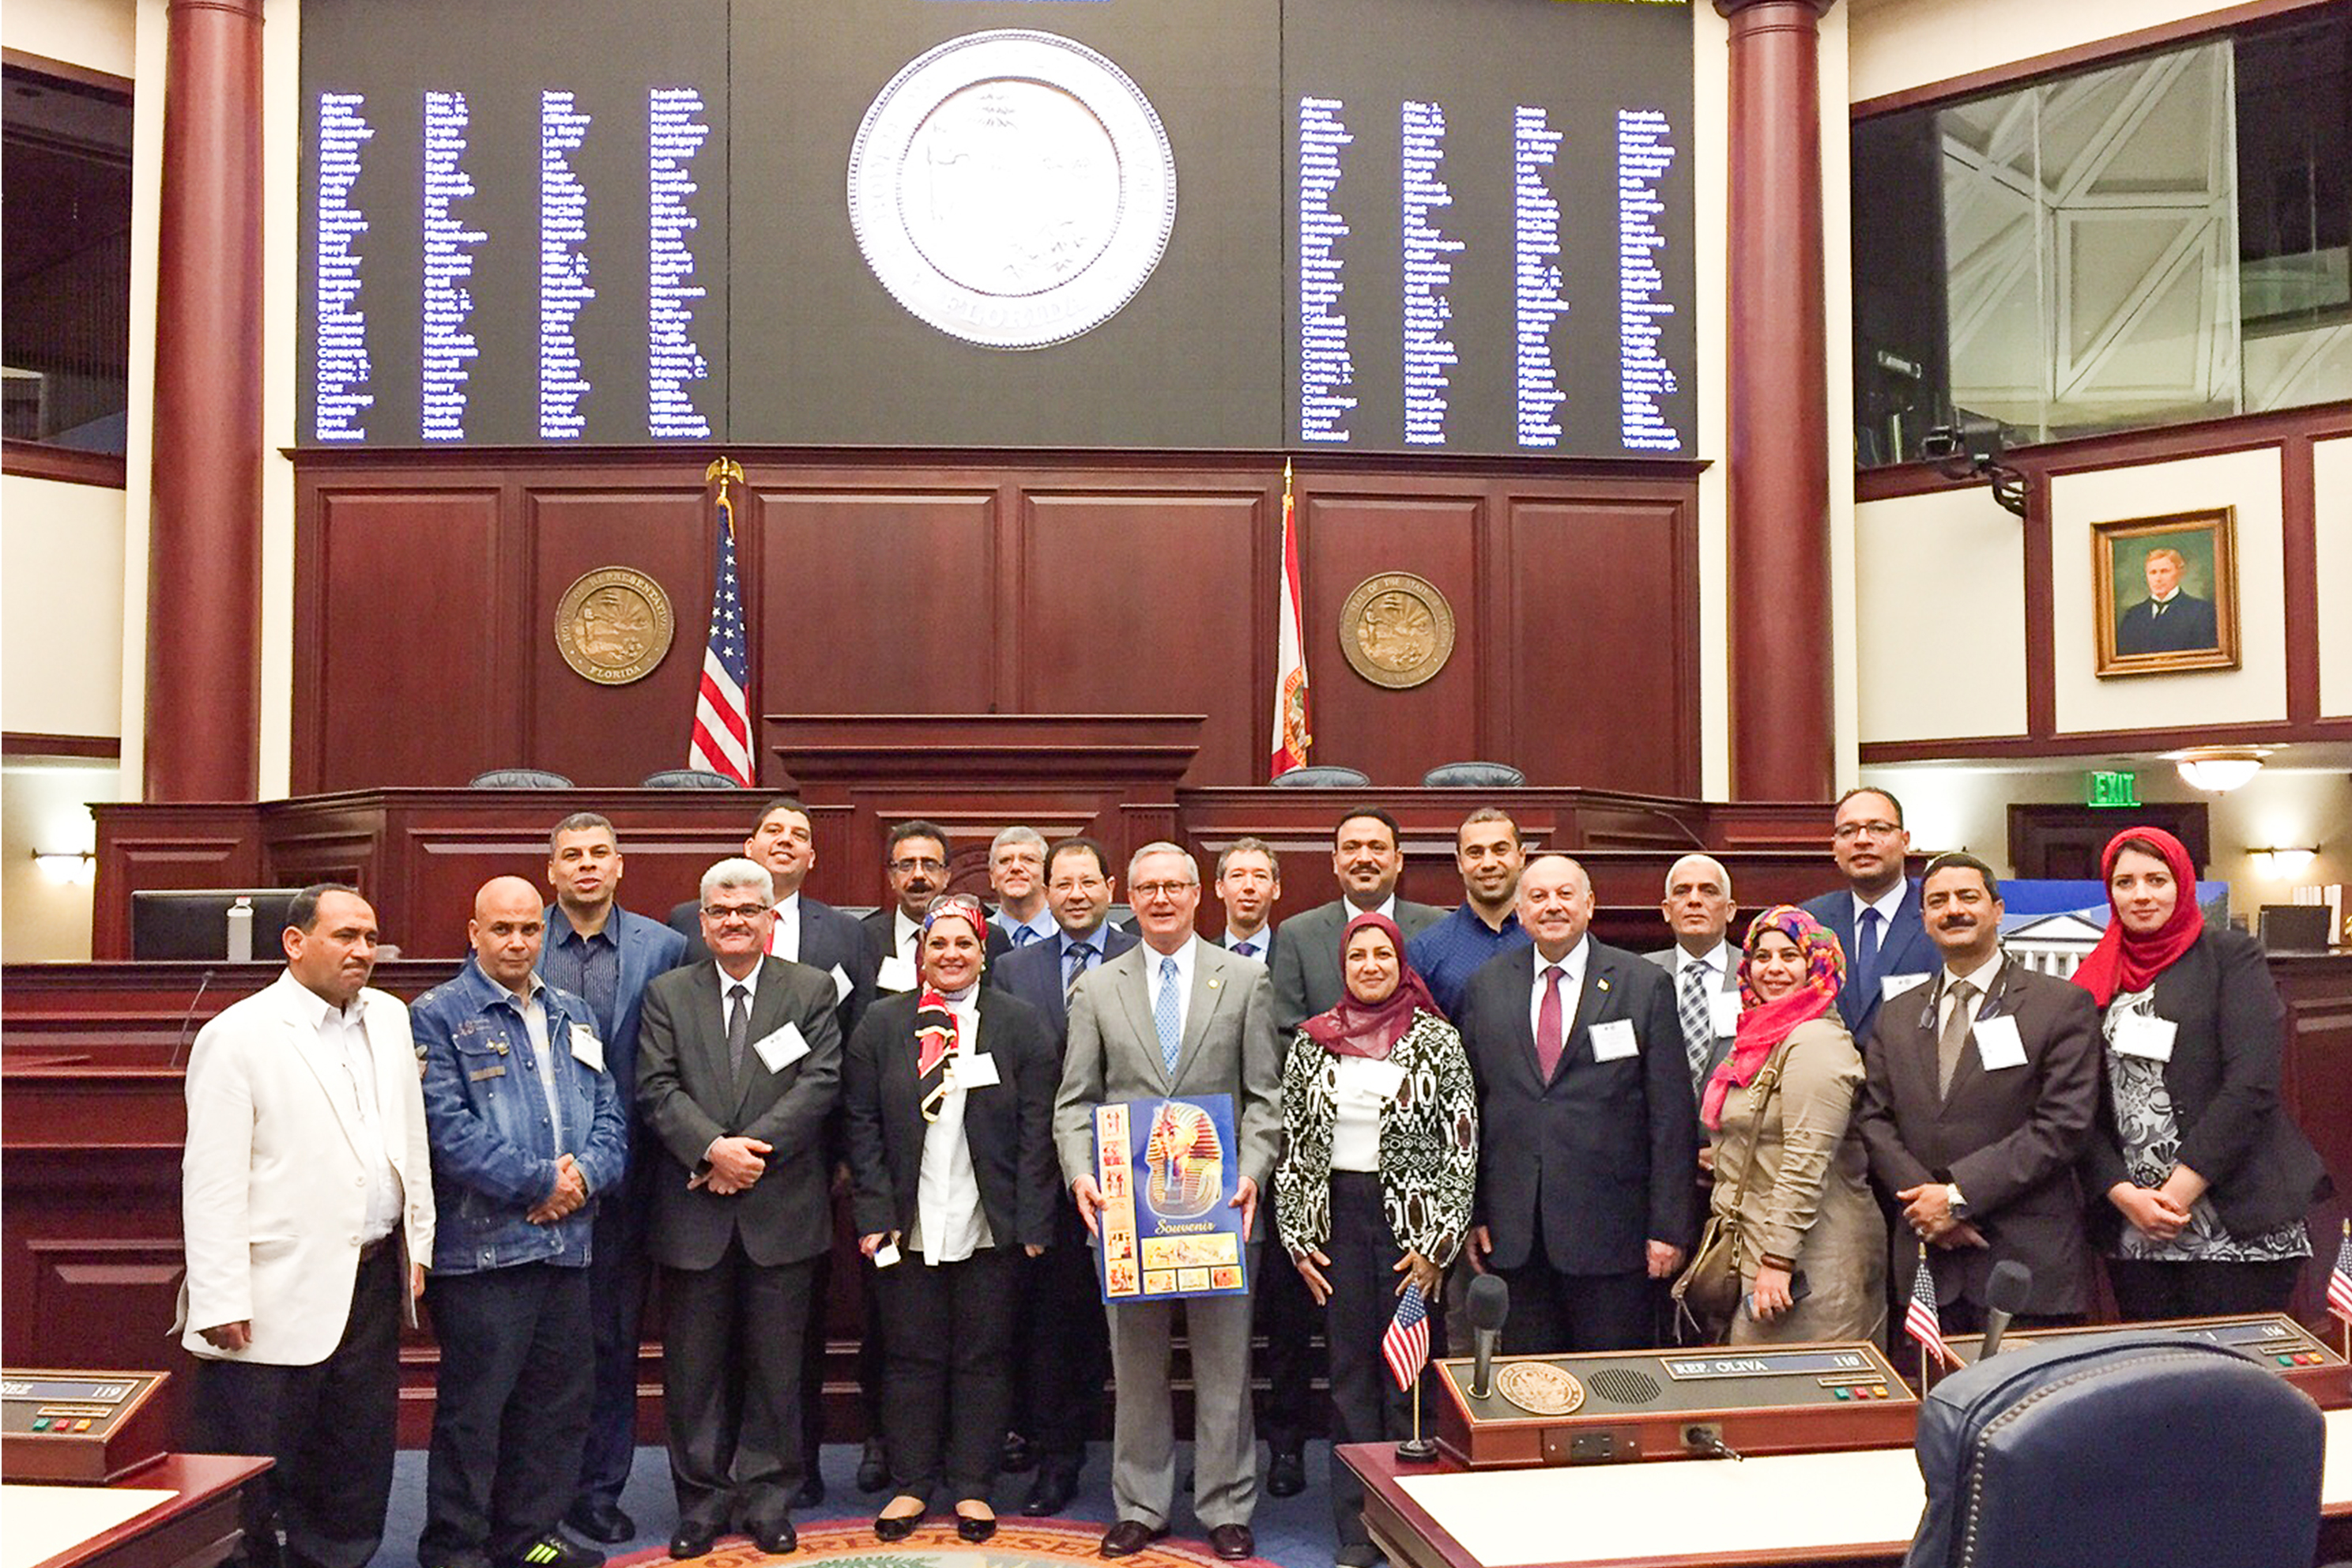 "Group photo of the members of the CCAP Egypt delegation posing in large state government building"